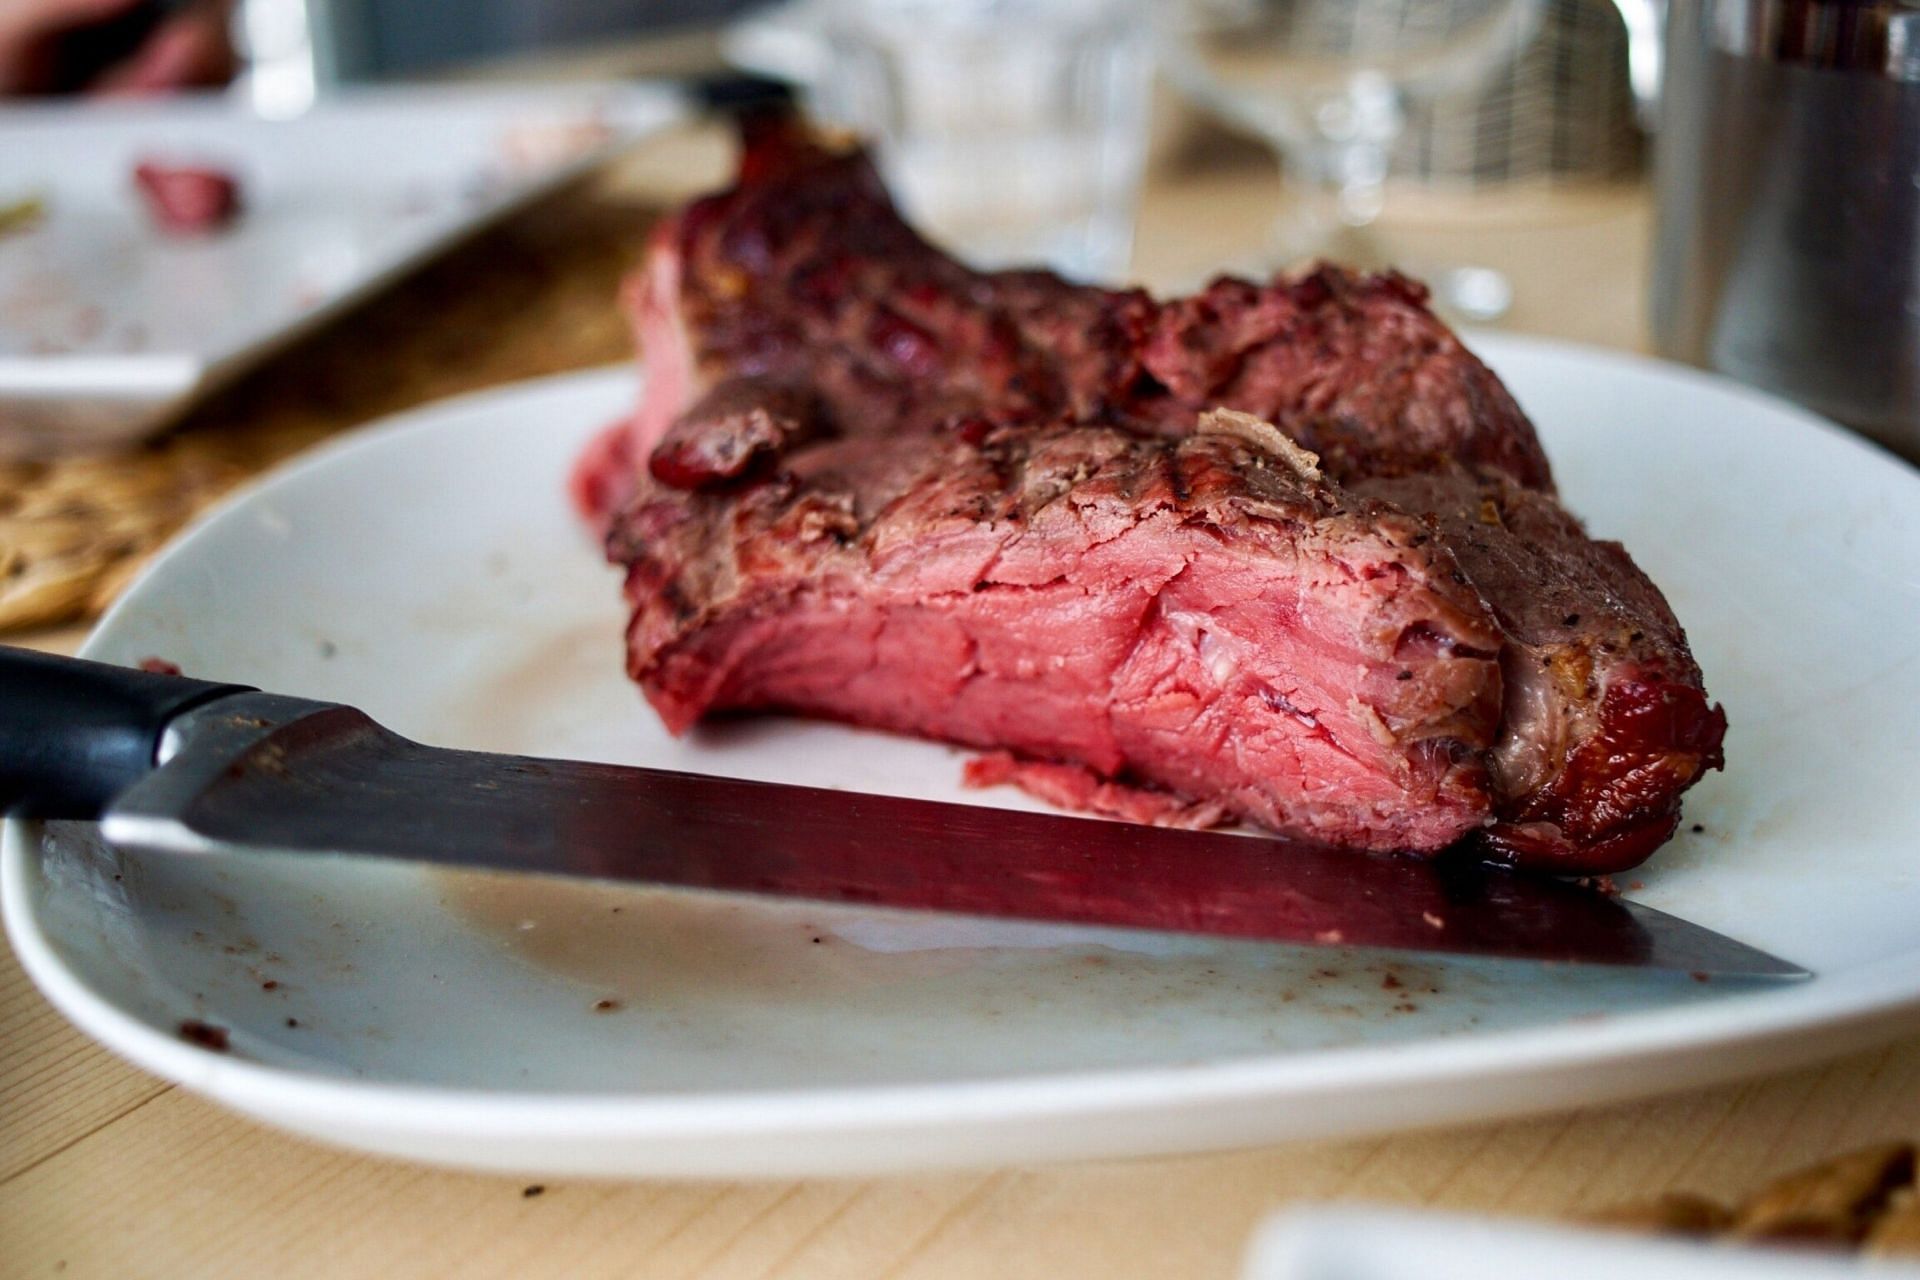 Foods to avoid with arthritis: Red meat develops a higher risk of developing arthritis. (Image via Unsplash / Sven Brandsma)